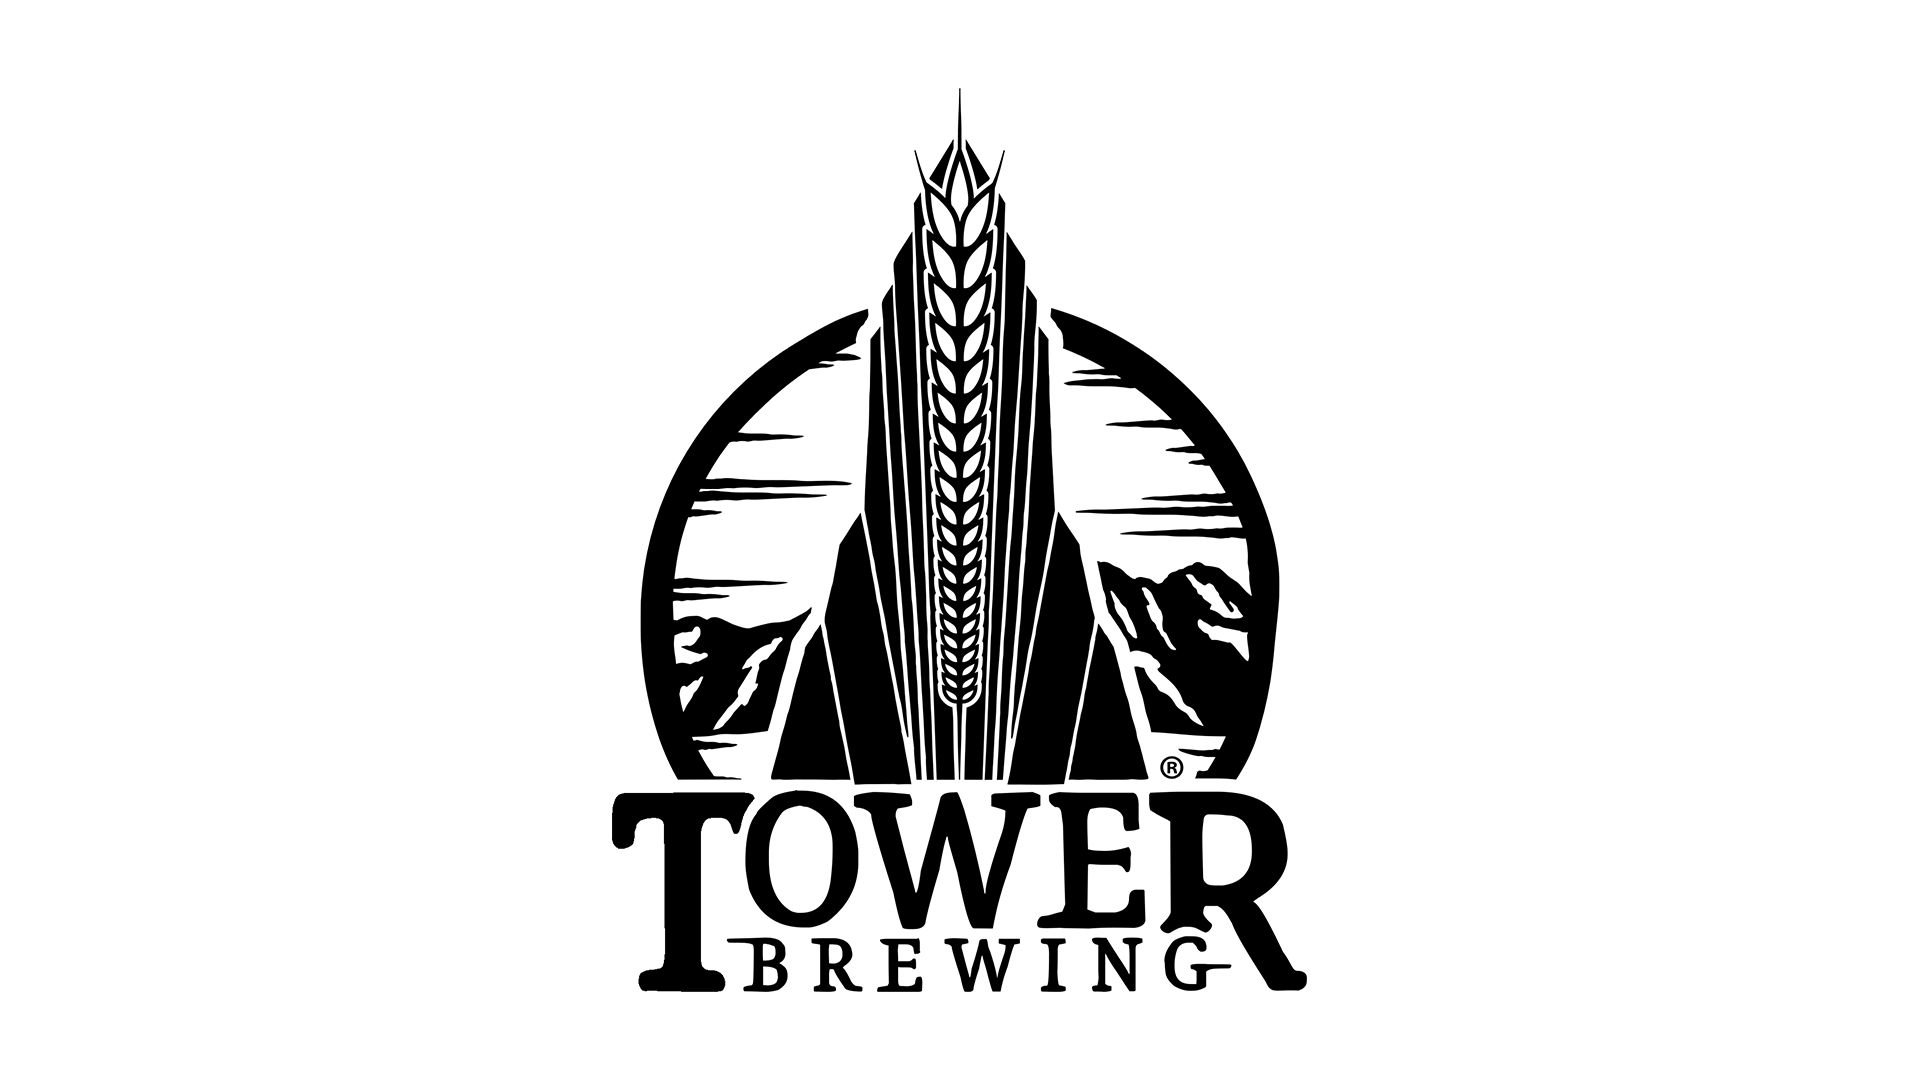 Tower Brewing